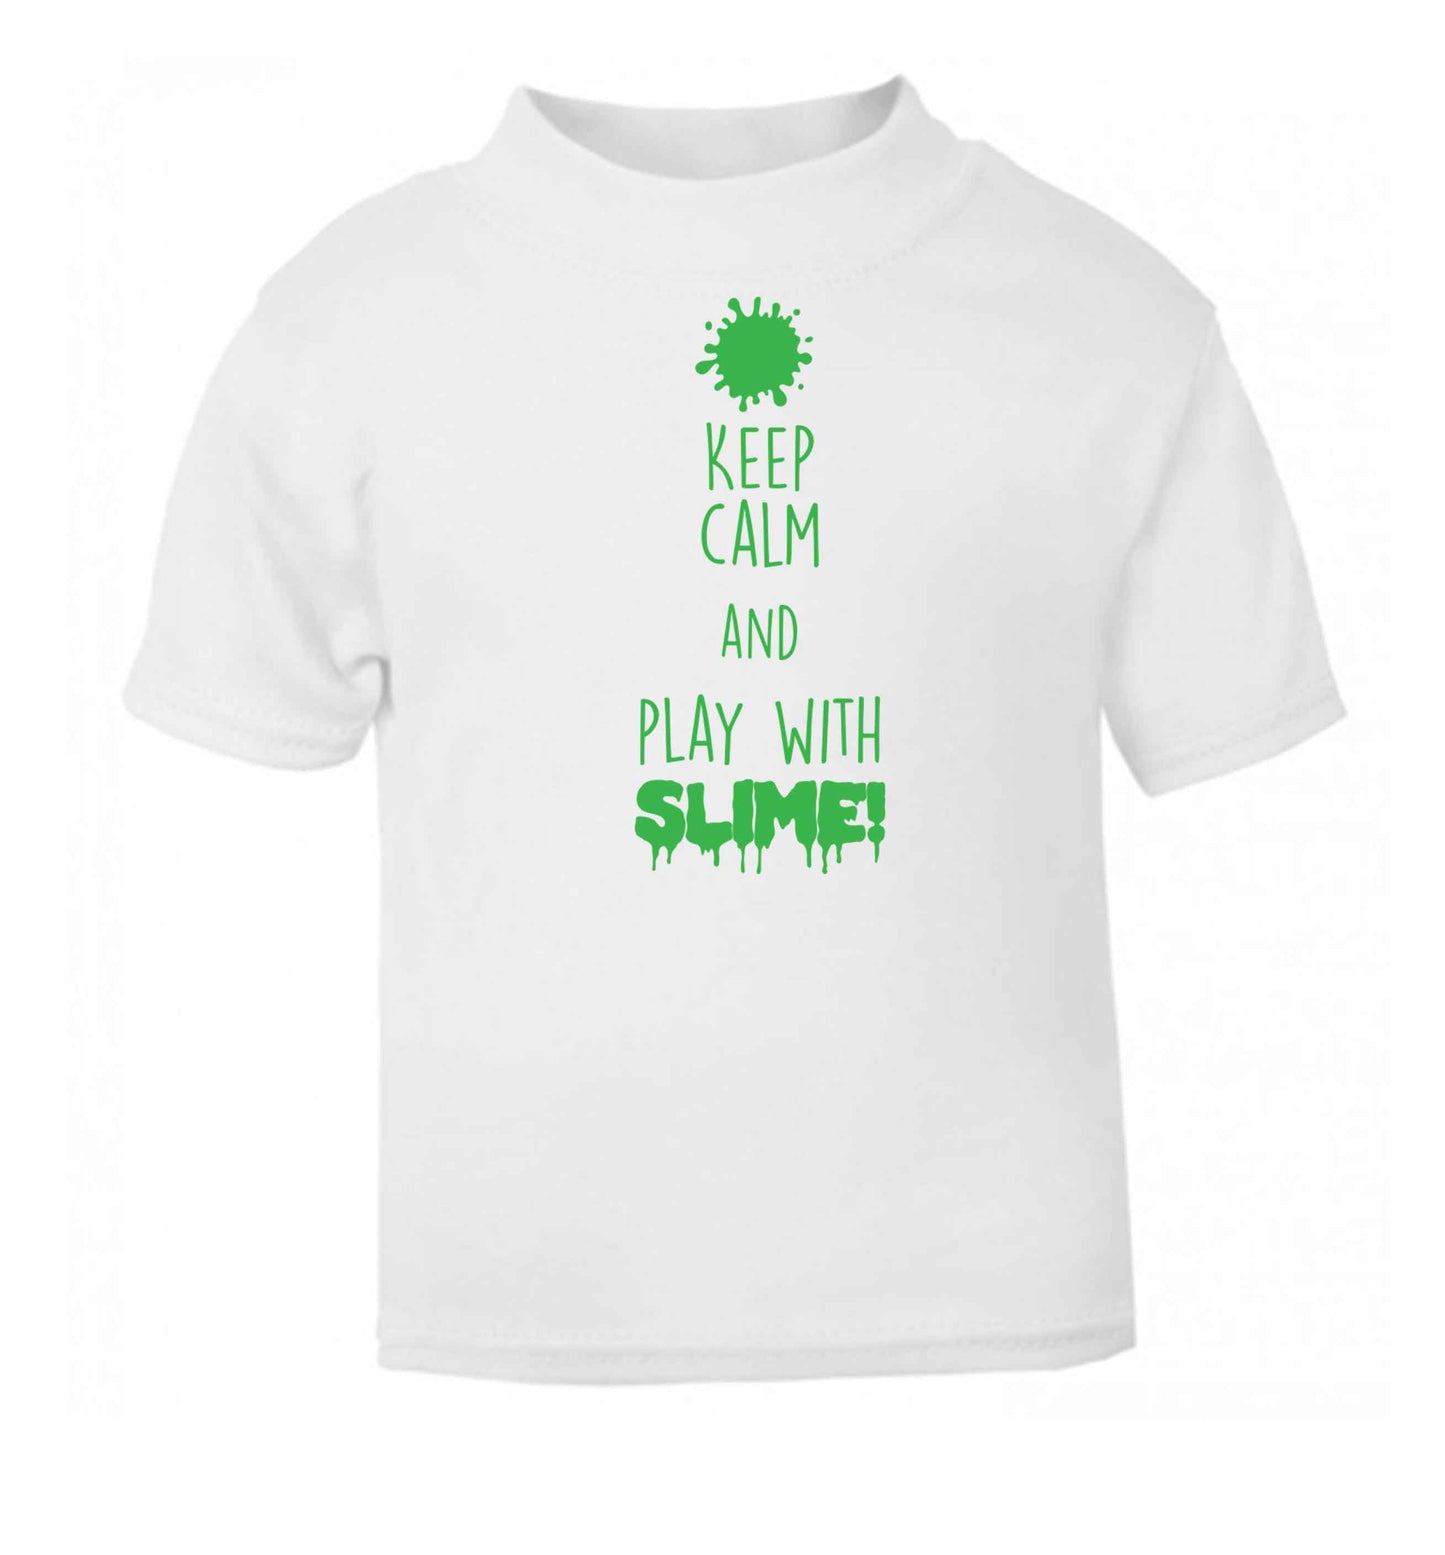 Neon green keep calm and play with slime!white baby toddler Tshirt 2 Years